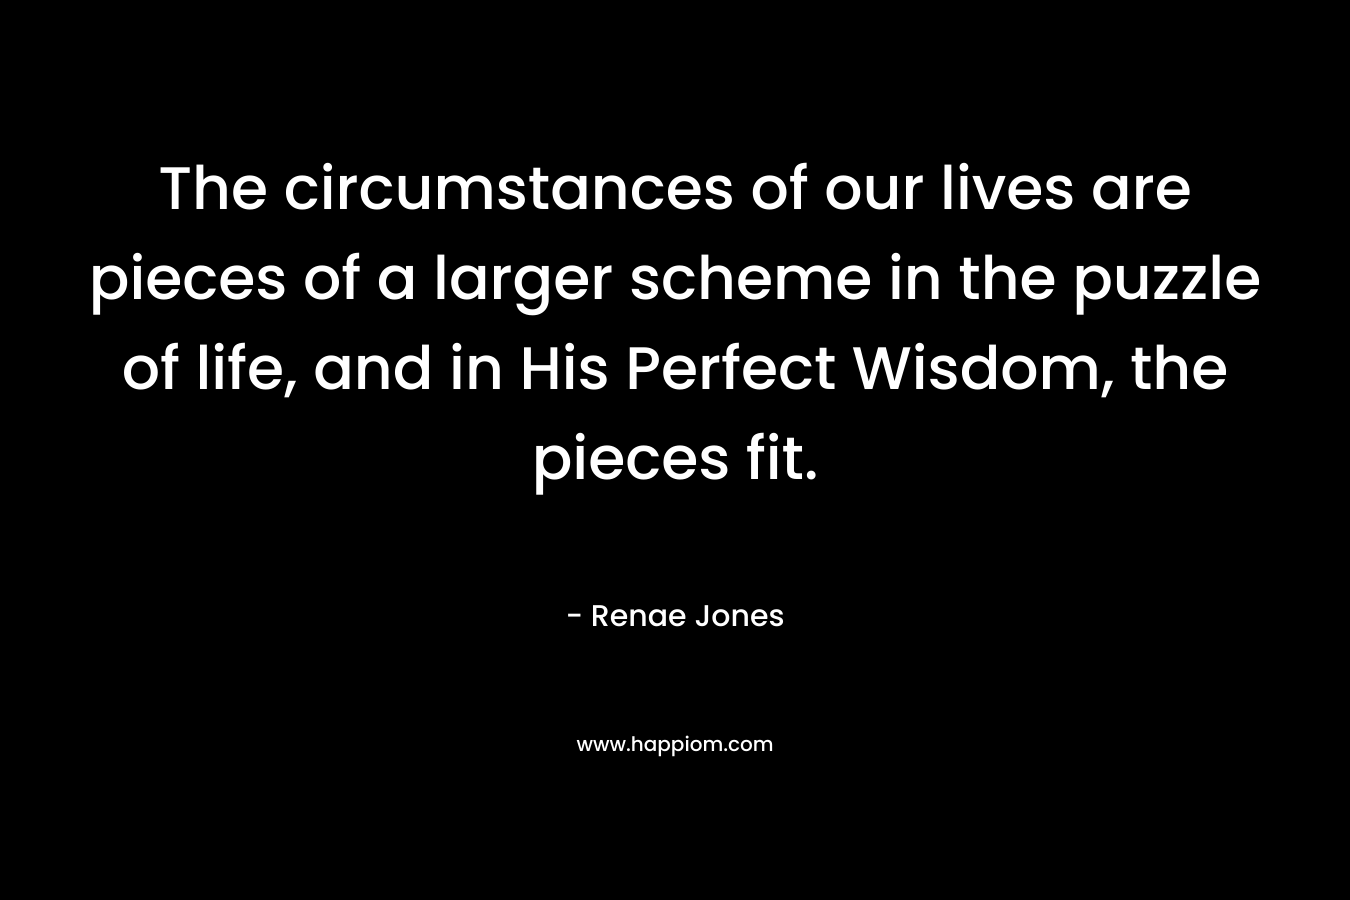 The circumstances of our lives are pieces of a larger scheme in the puzzle of life, and in His Perfect Wisdom, the pieces fit.